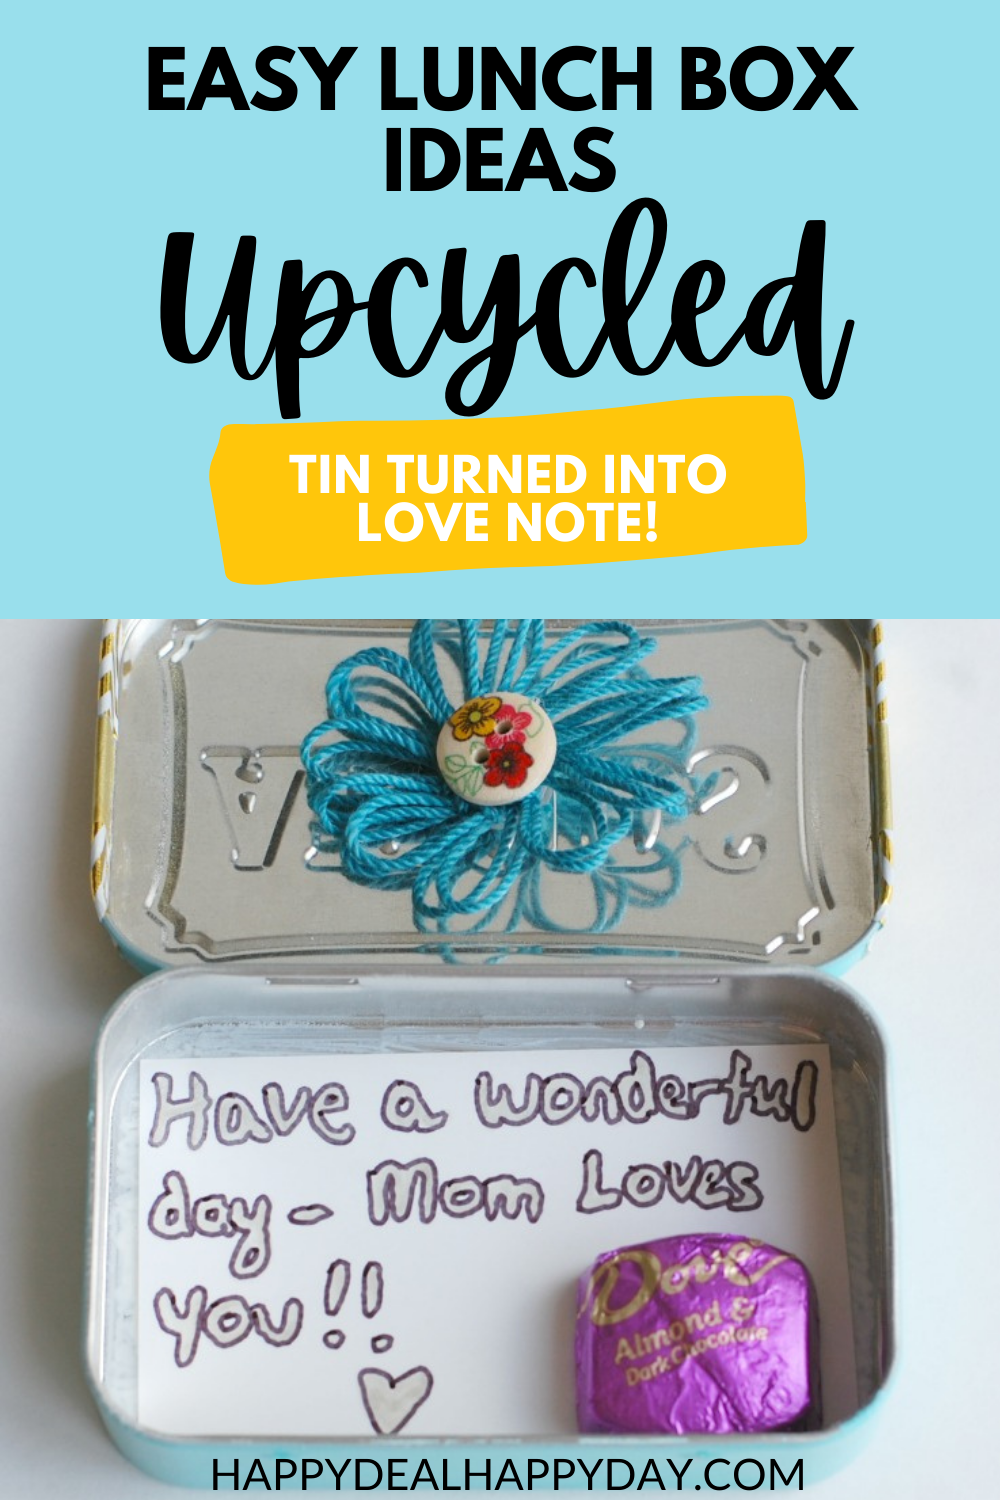 Do It Yourself DIY Medium White Lunch Box Tin for Storage, Crafts and Scrapbook Fun Activities